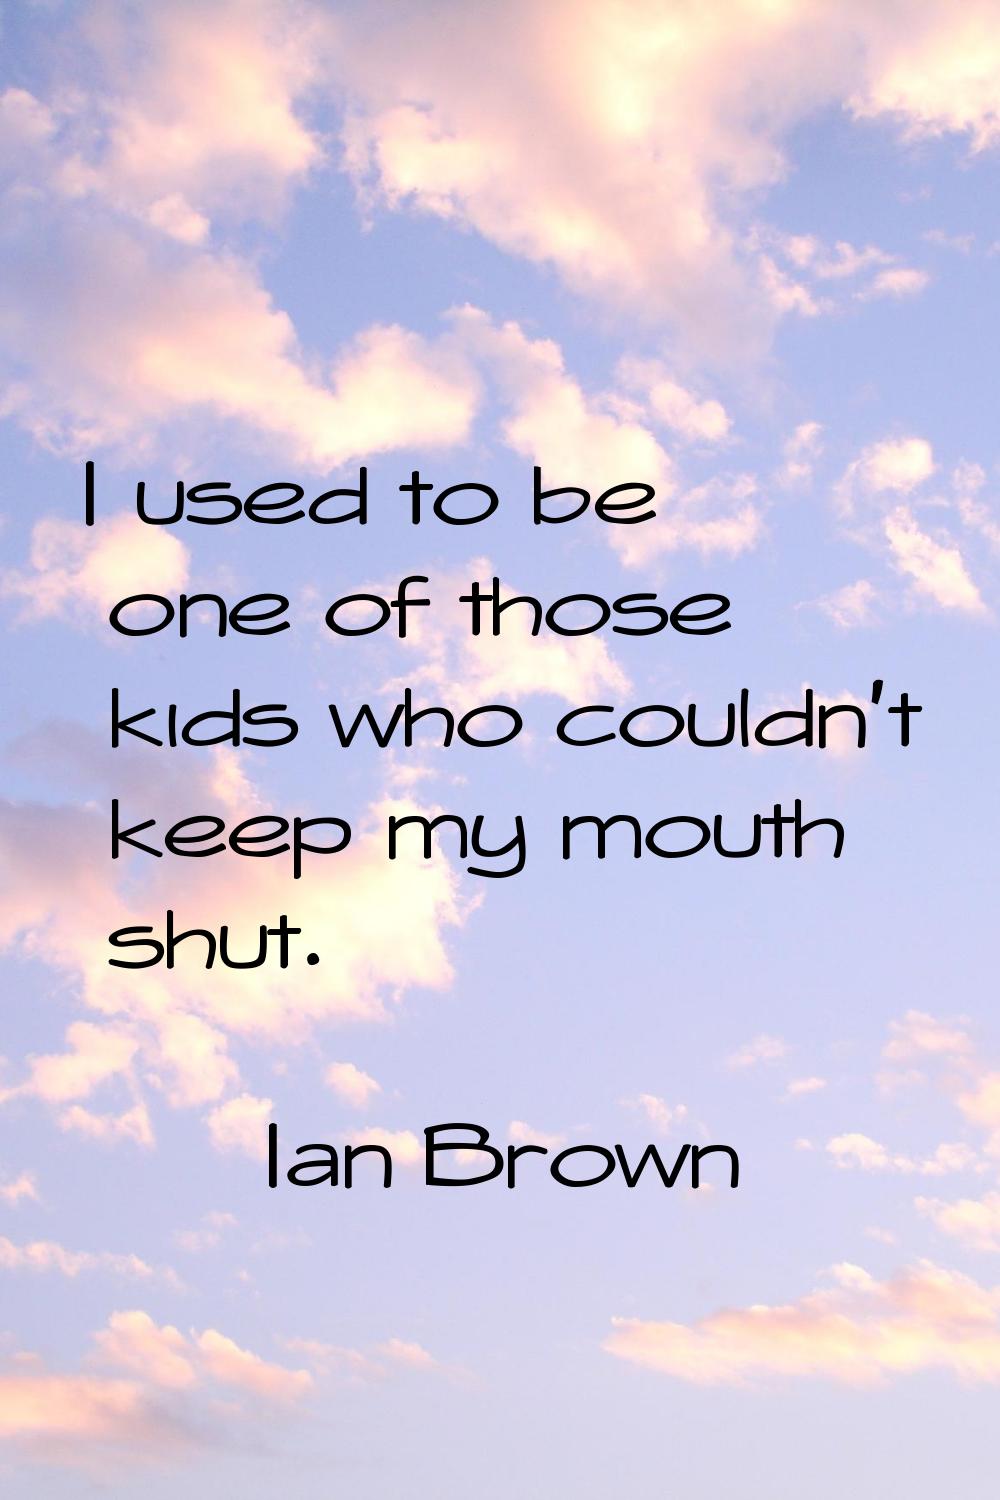 I used to be one of those kids who couldn't keep my mouth shut.